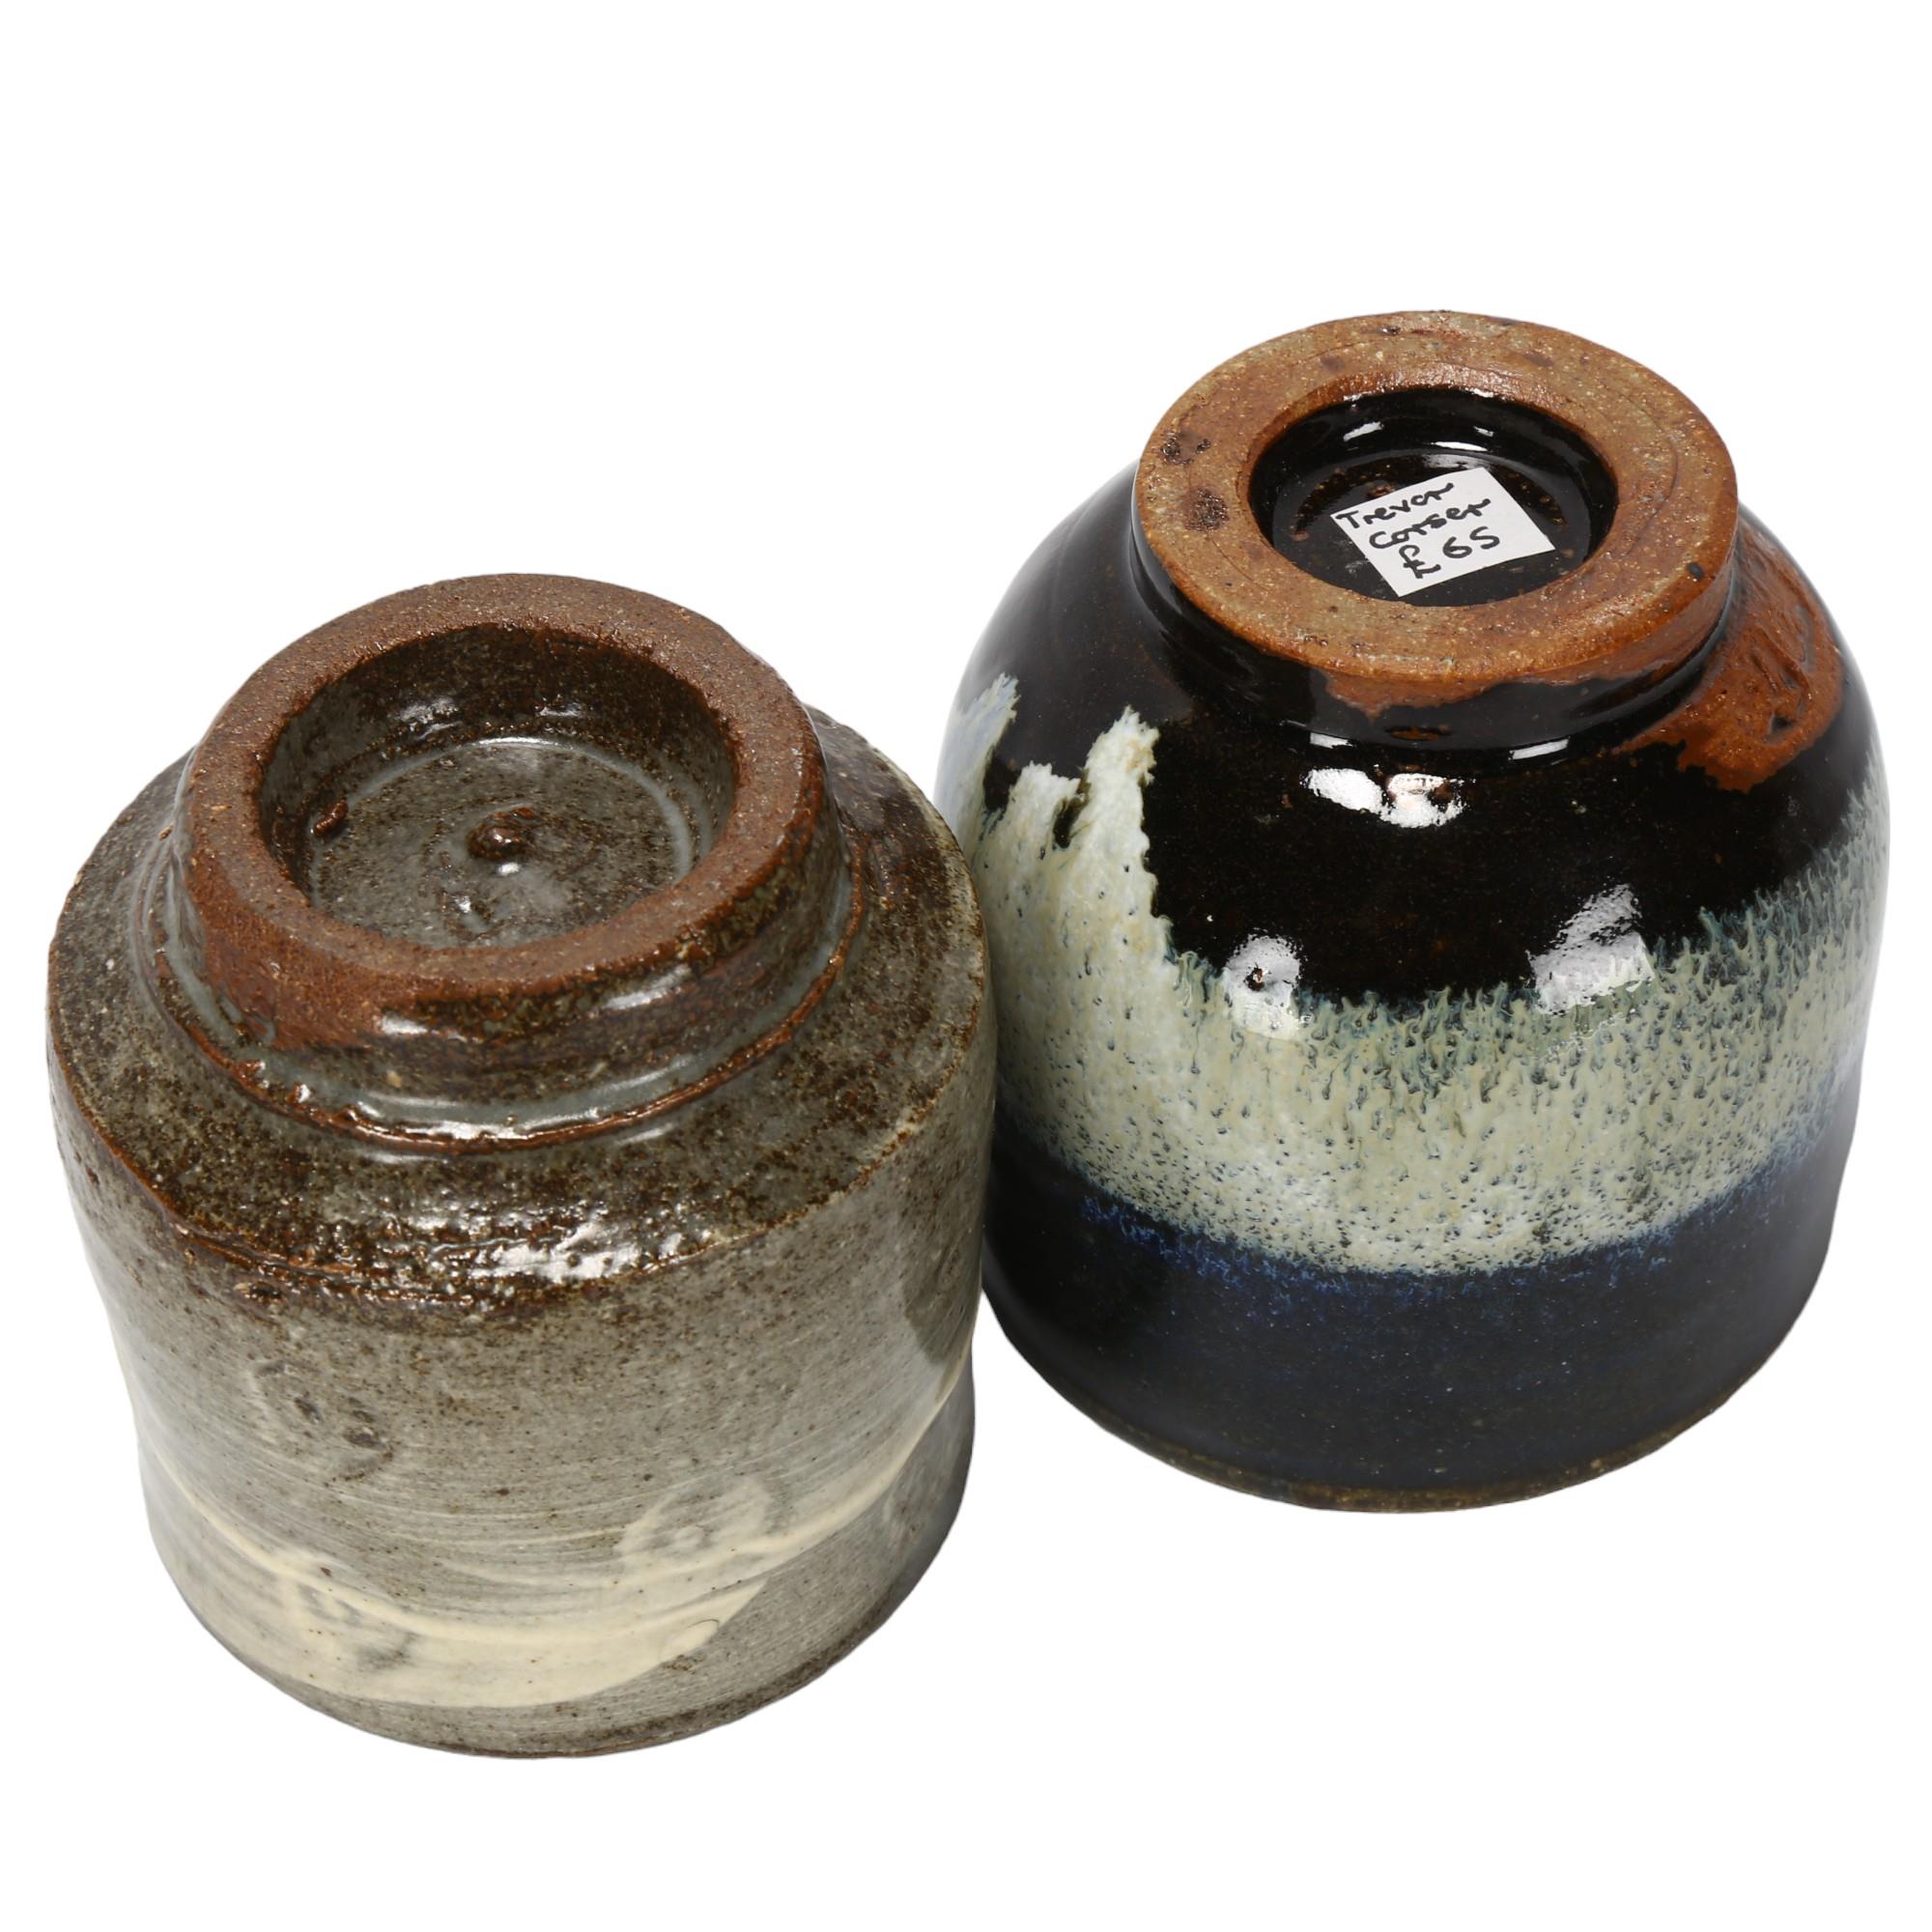 Leach Pottery, St Ives, 2 Yunomi / tea bowls, TREVOR CORSER and JOHN BEDDING, makers stamp and - Image 3 of 3